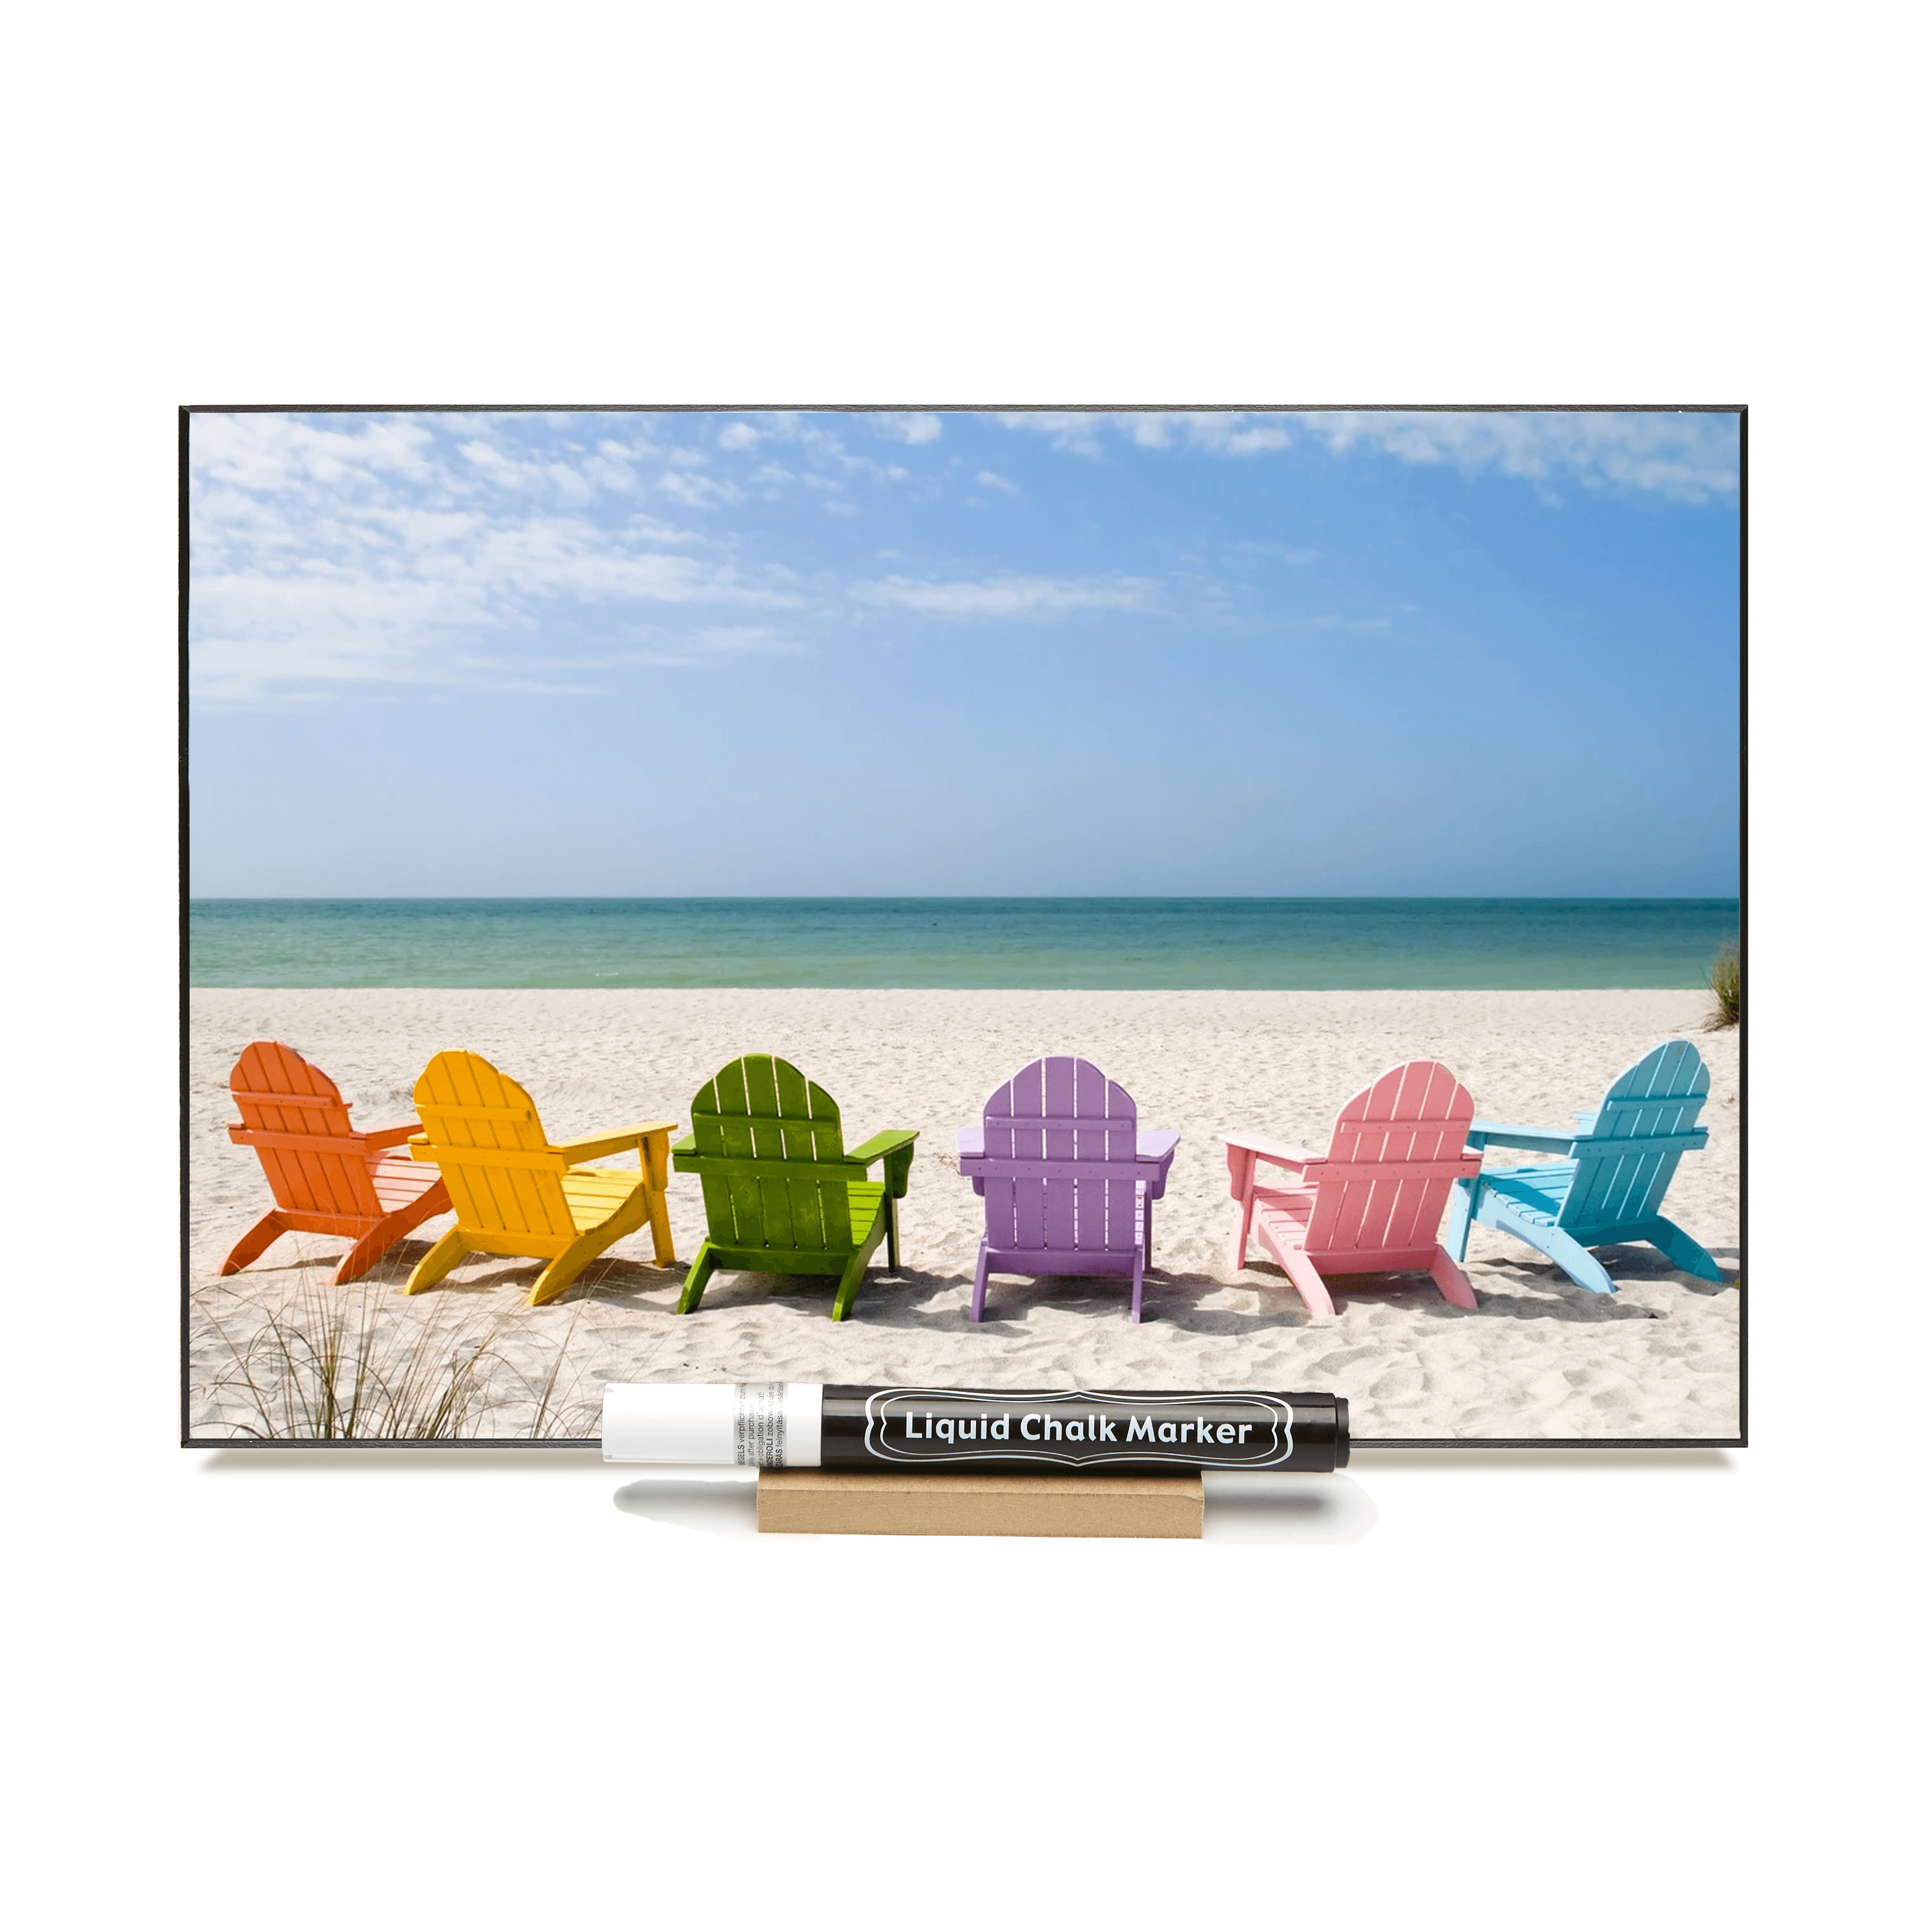 "Chairs On Beach" PHOTO CHALKBOARD Includes Chalkboard, Chalk Marker and Stand